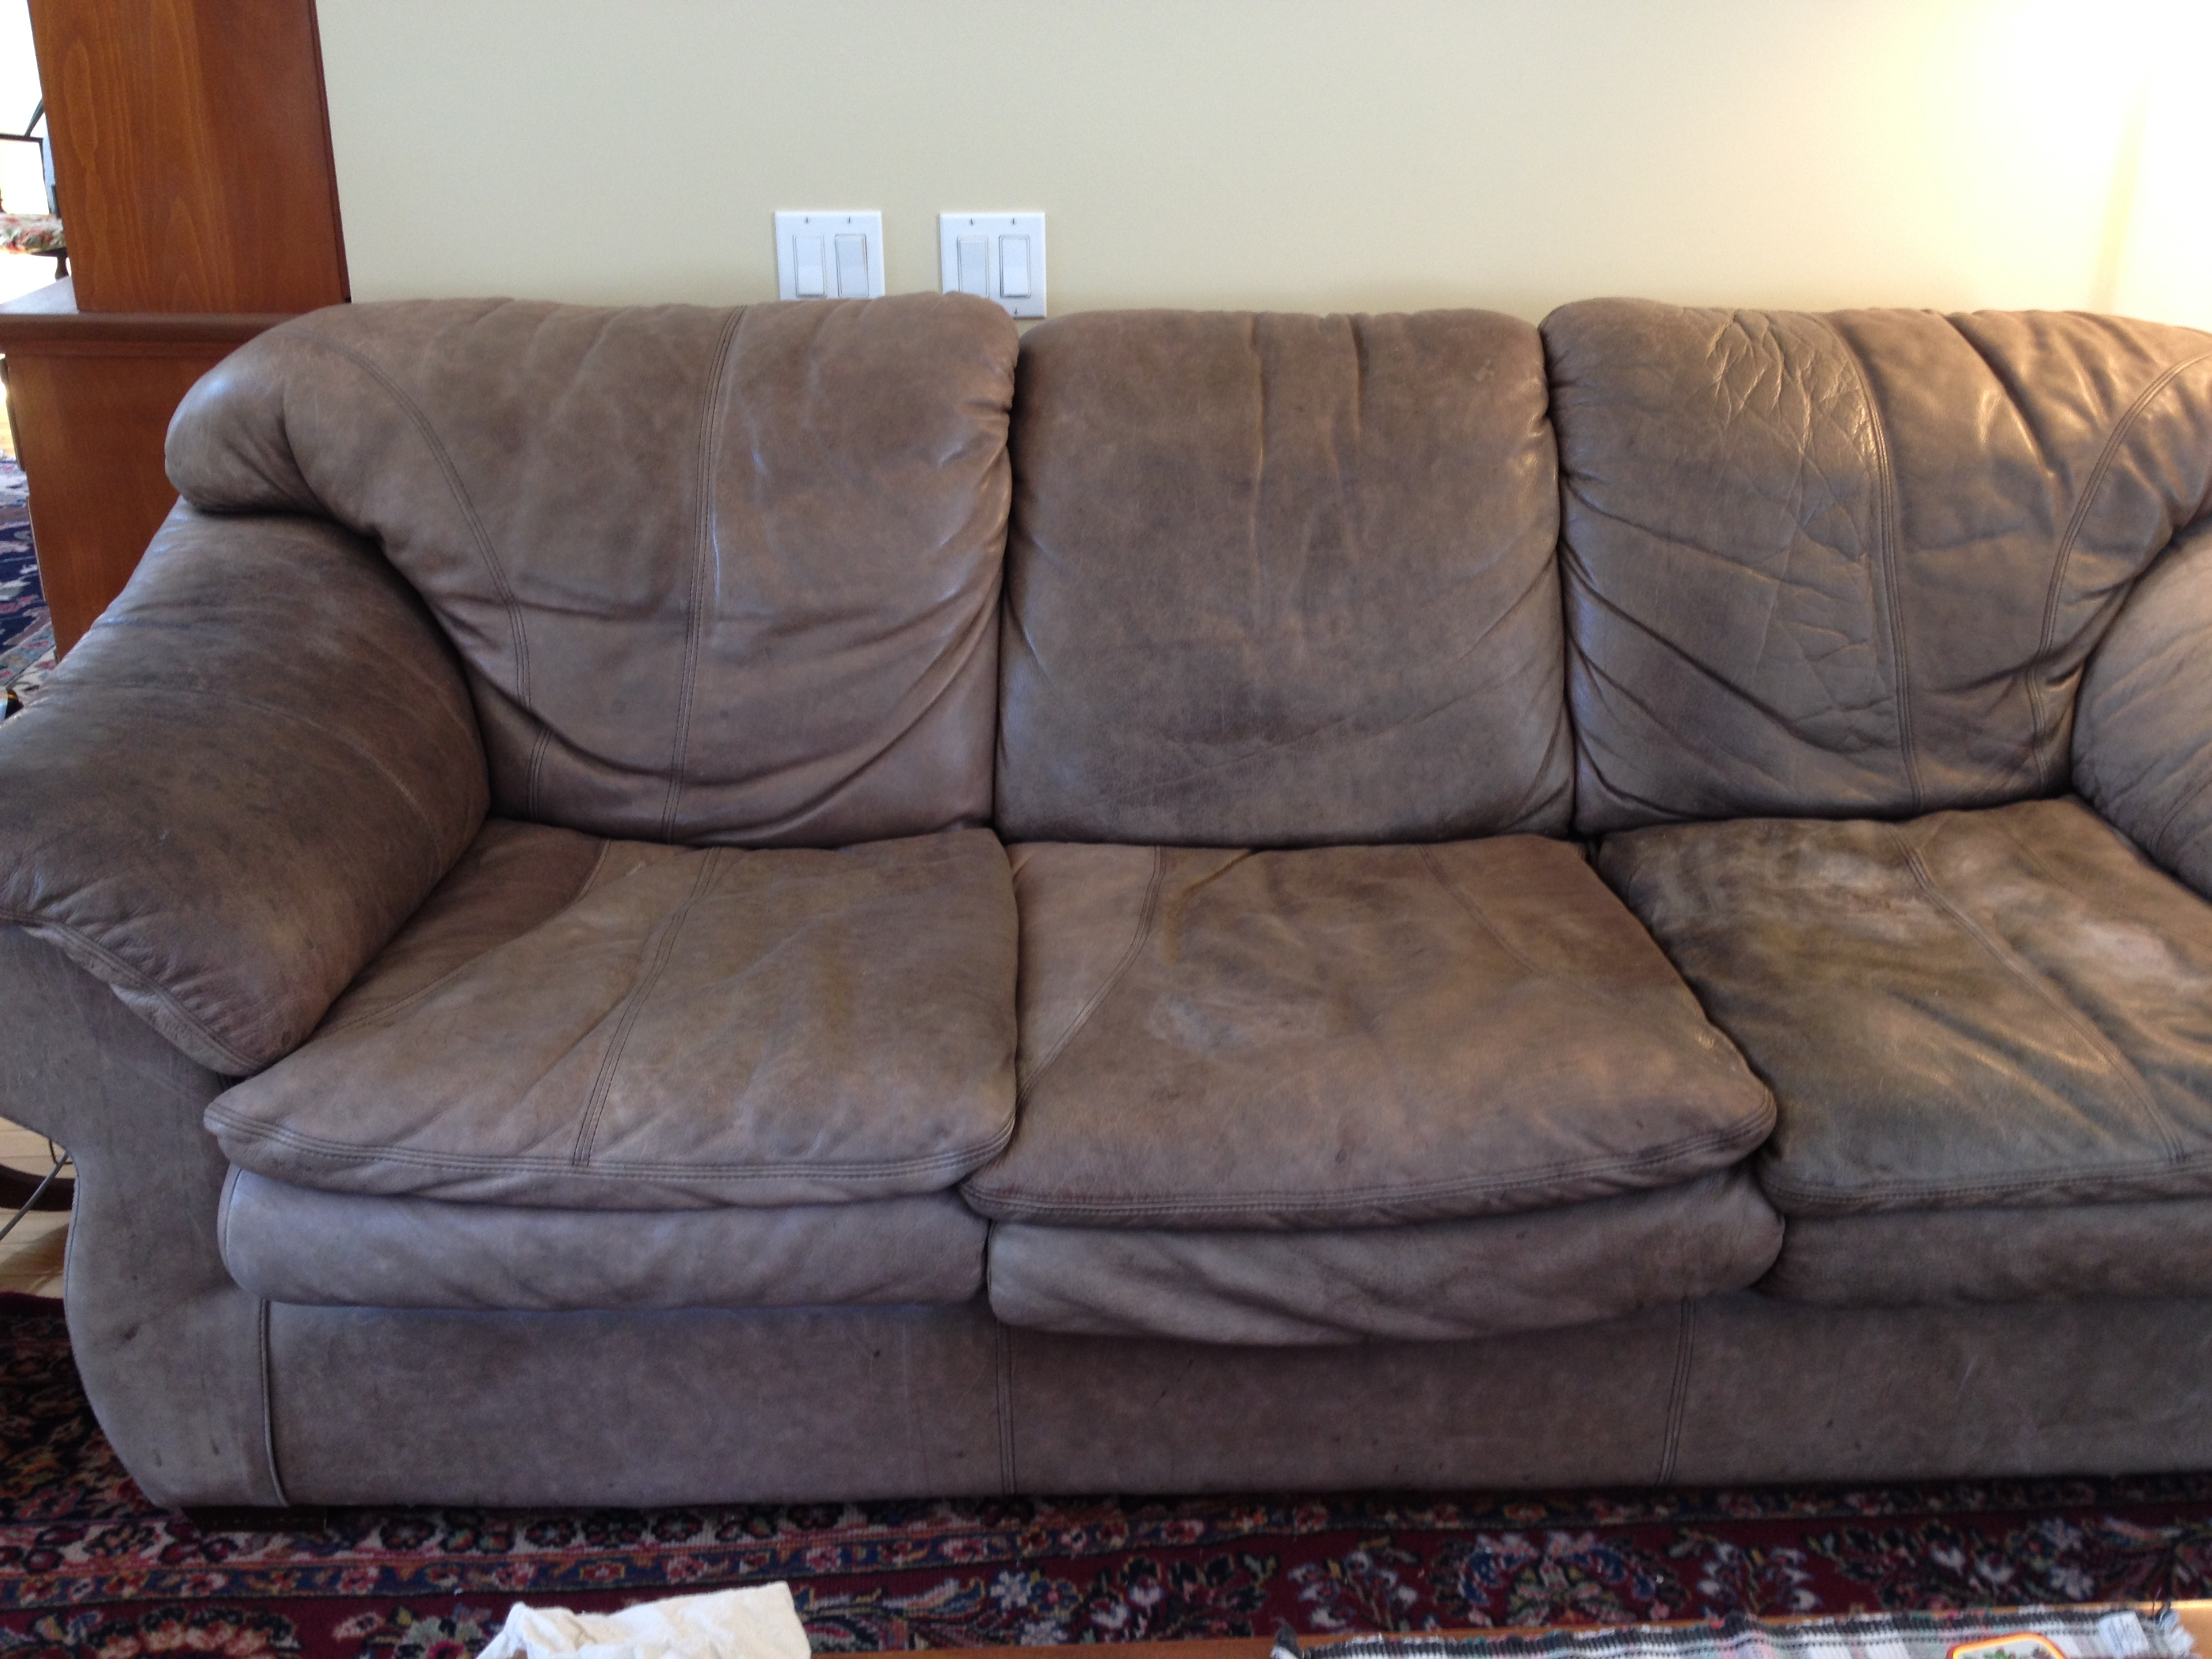 Leather Furniture Recovery, How To Wash Leather Couch Cushion Covers